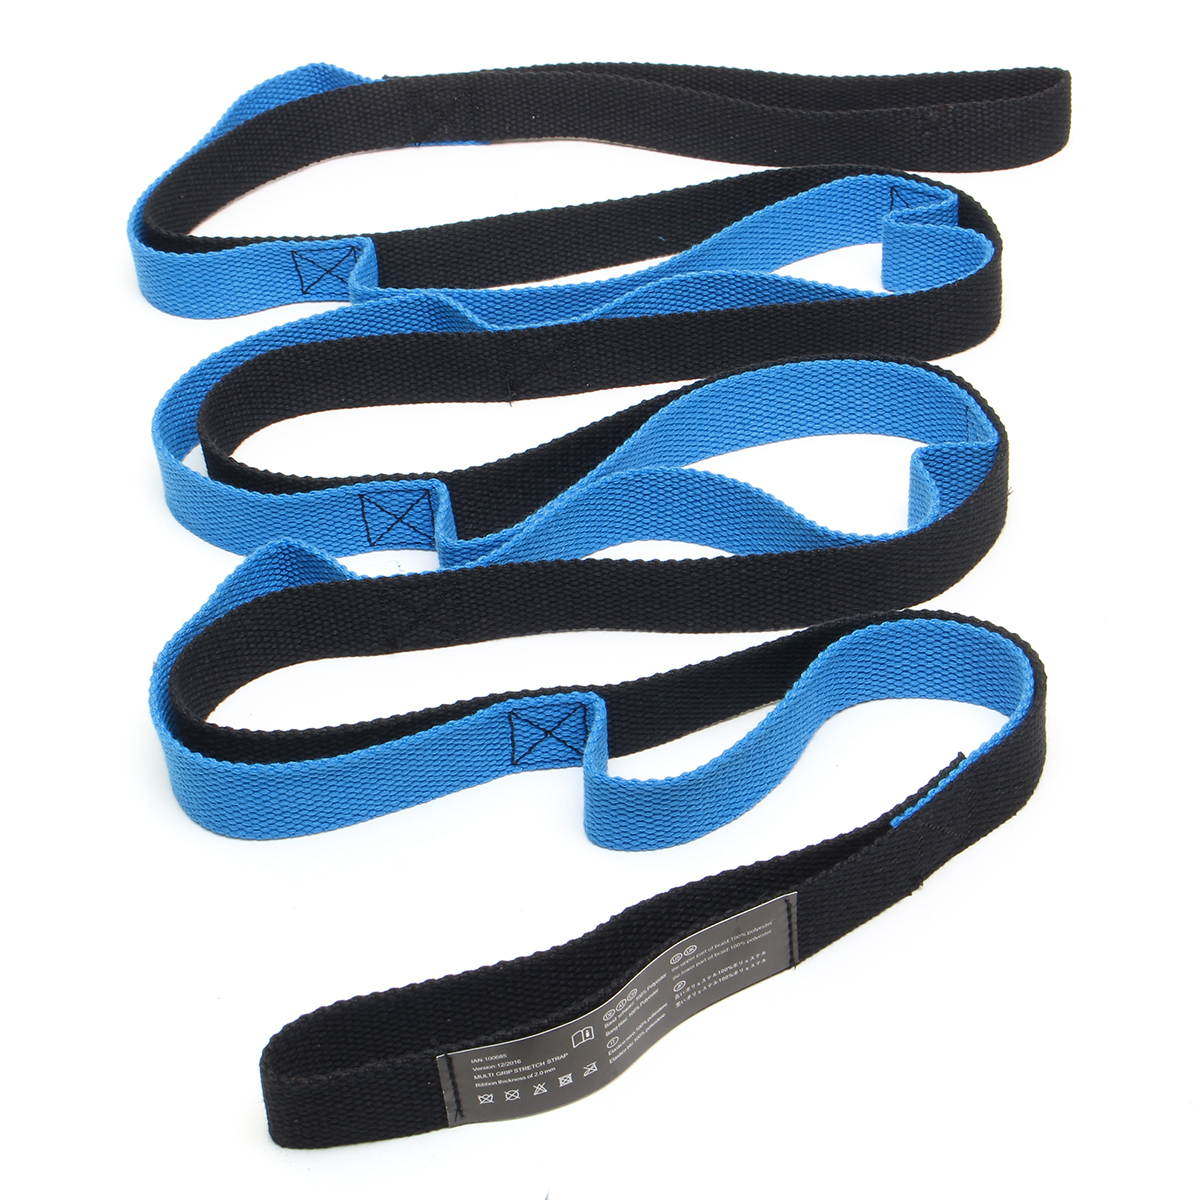 10-Loops-Sport--Arms-Legs-Back-Shoulders-Fitness-Foldable-Yoga-Stretch-Strap-1272633